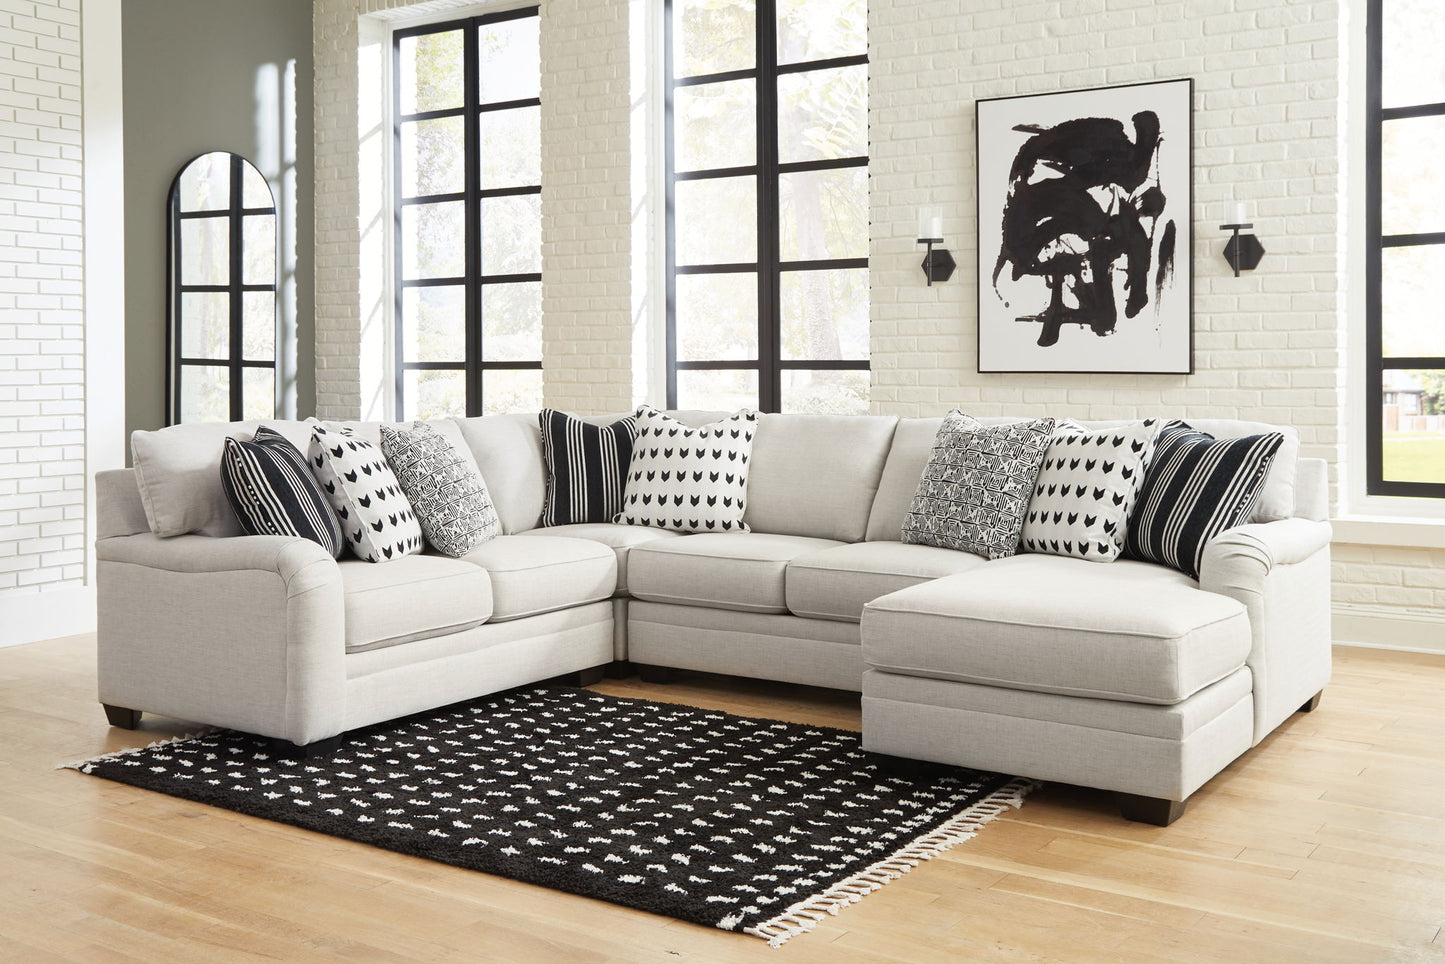 Huntsworth - Dove Gray - 4-Piece Sectional With Raf Corner Chaise